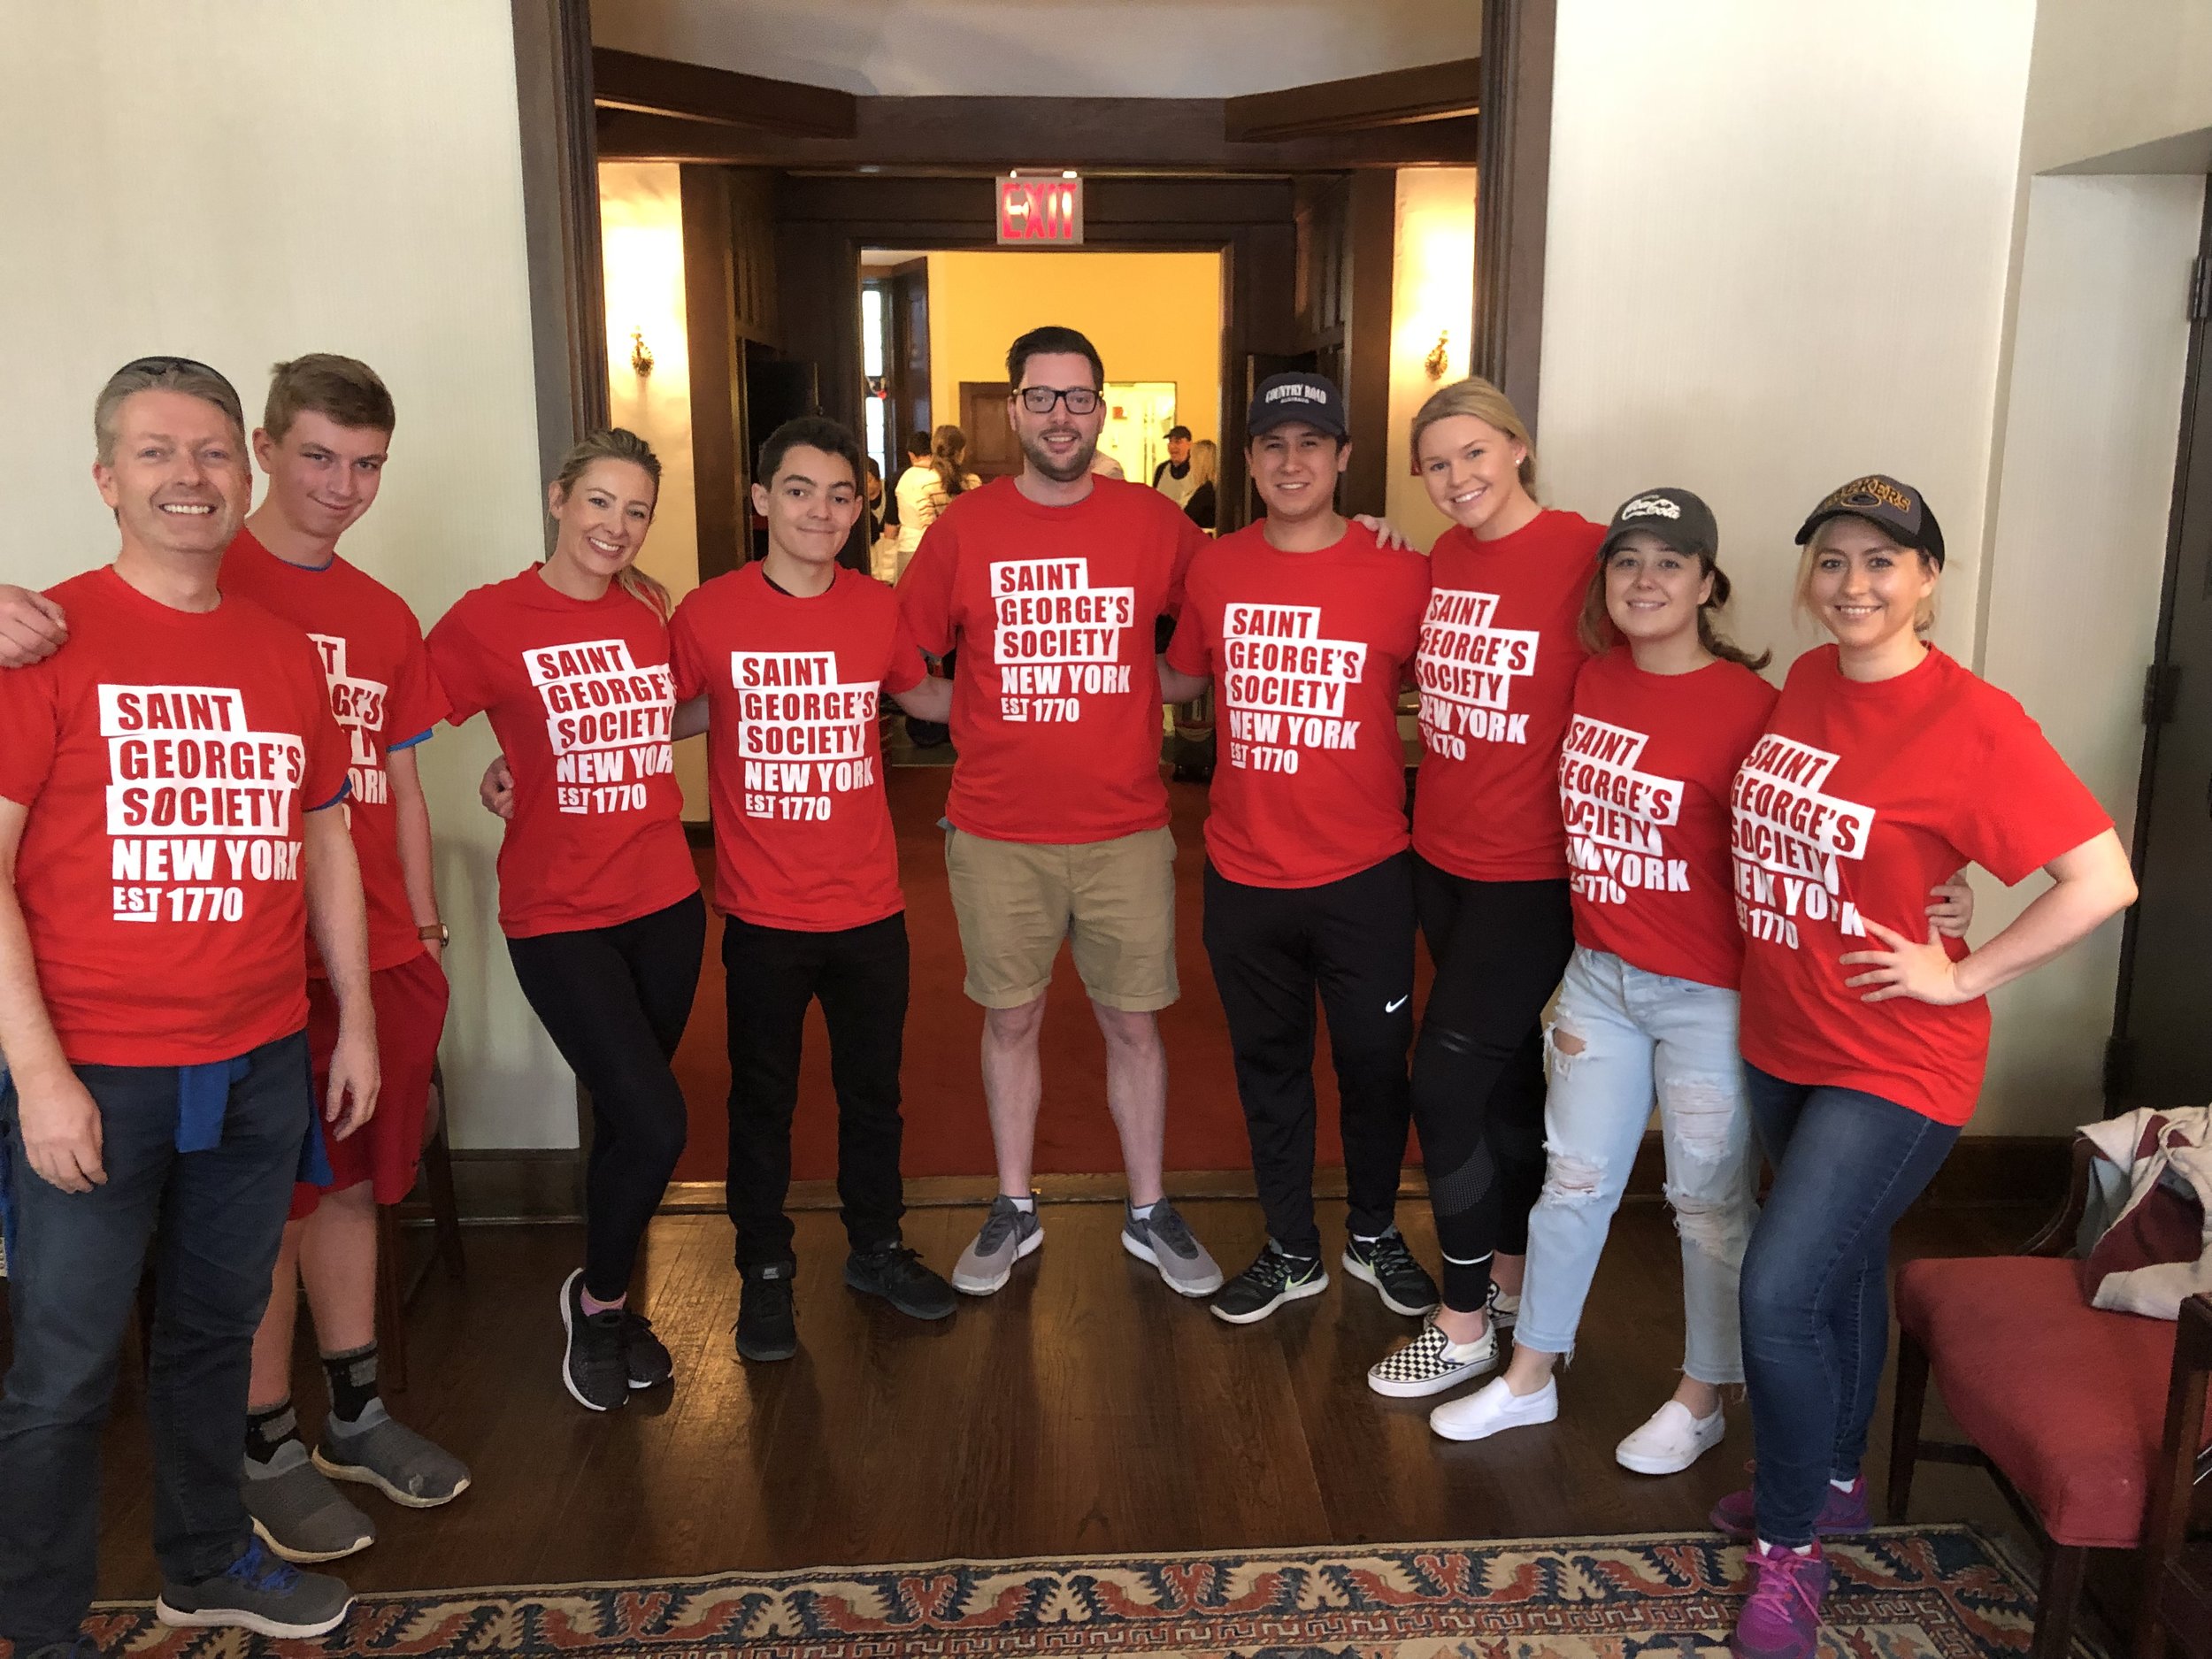 ST. GEORGE'S GIVES BACK - MAY 2019